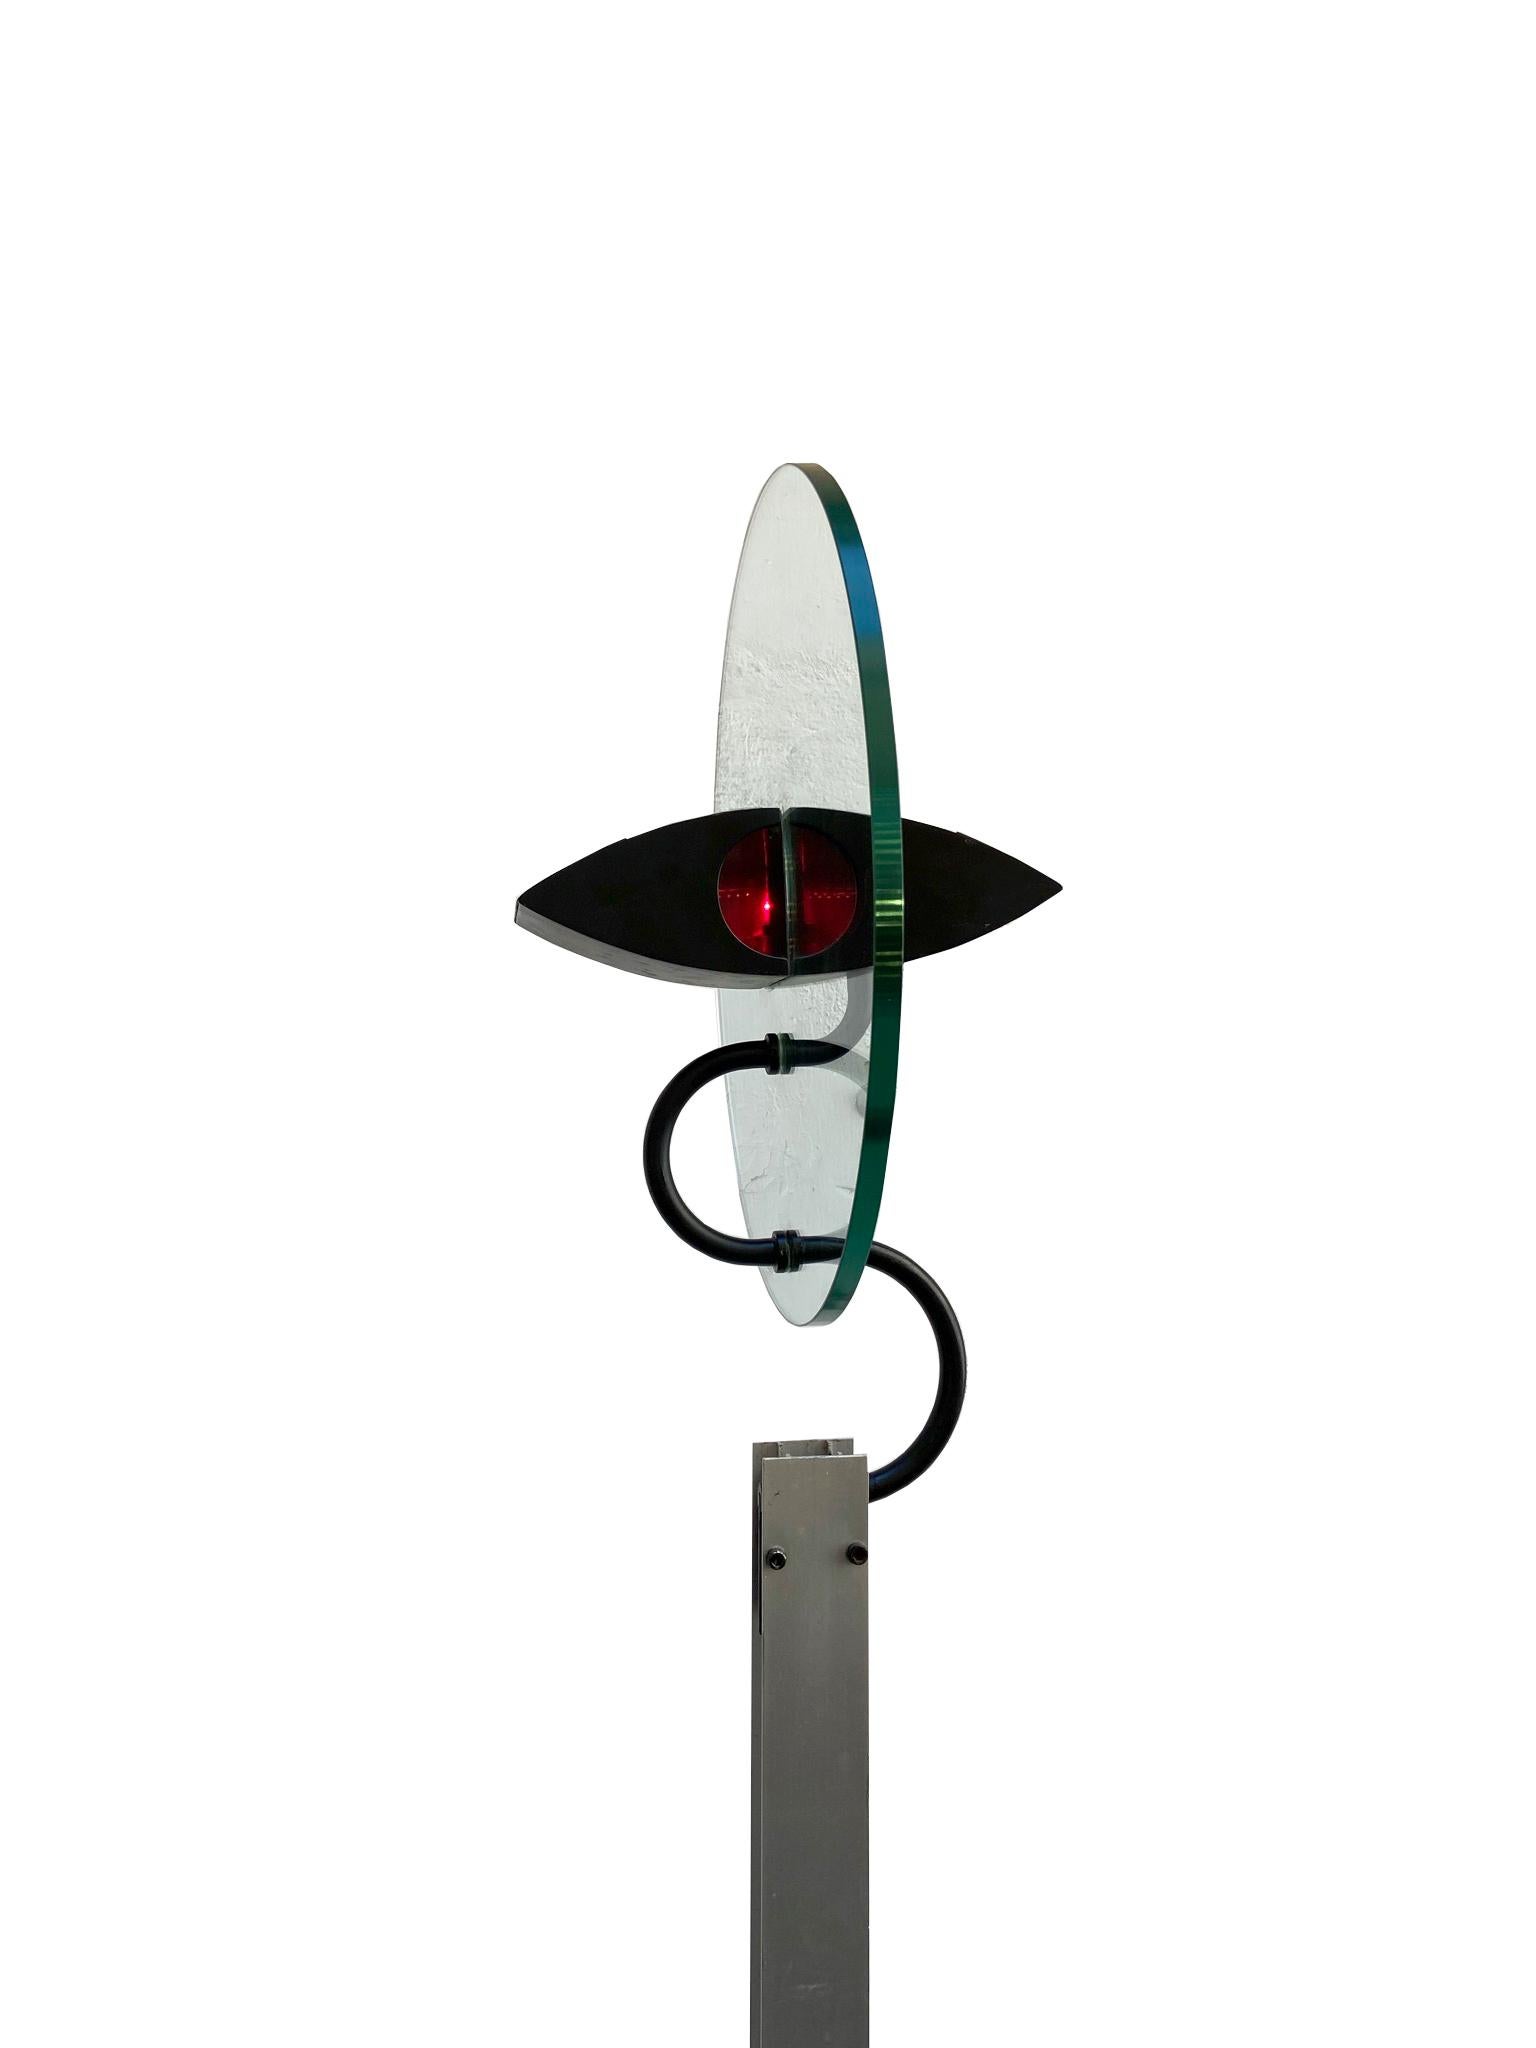 This sculptural floor lamp model Olimpia takes inspiration from the design of the eye. It was designed by Carlo Forcolini and produced by Artemide. It comes from the first series of Olimpia lamps.